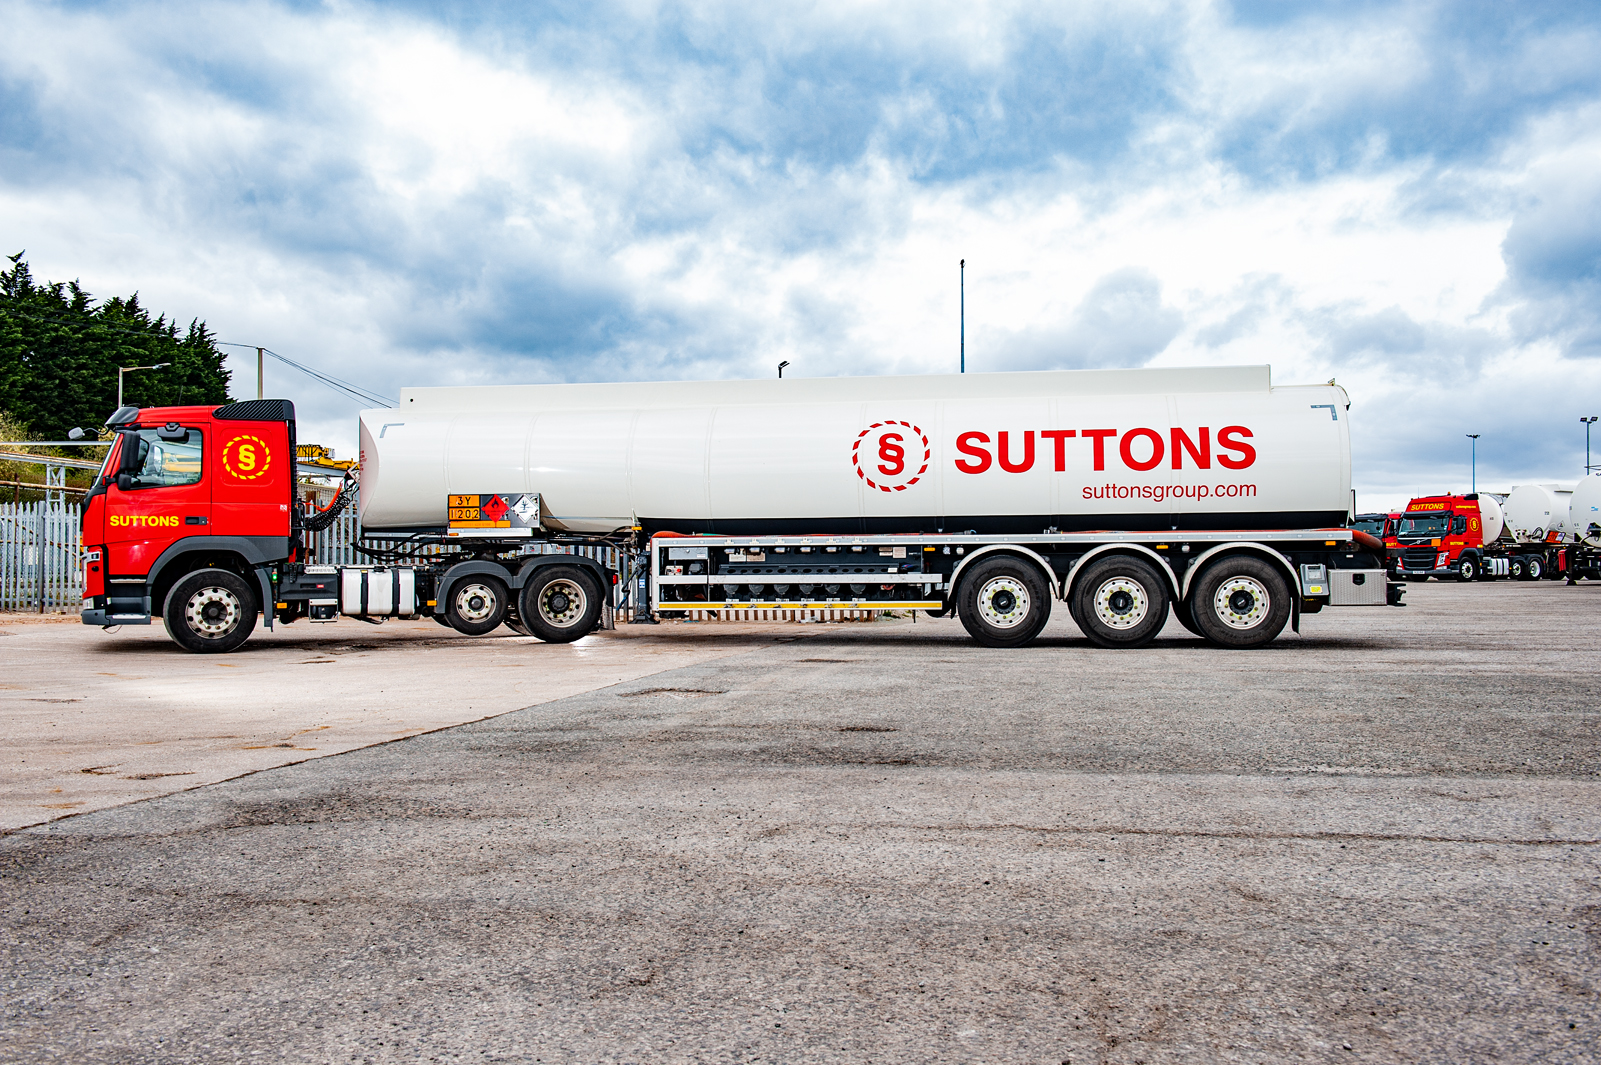 Suttons road tanker transporting fuel